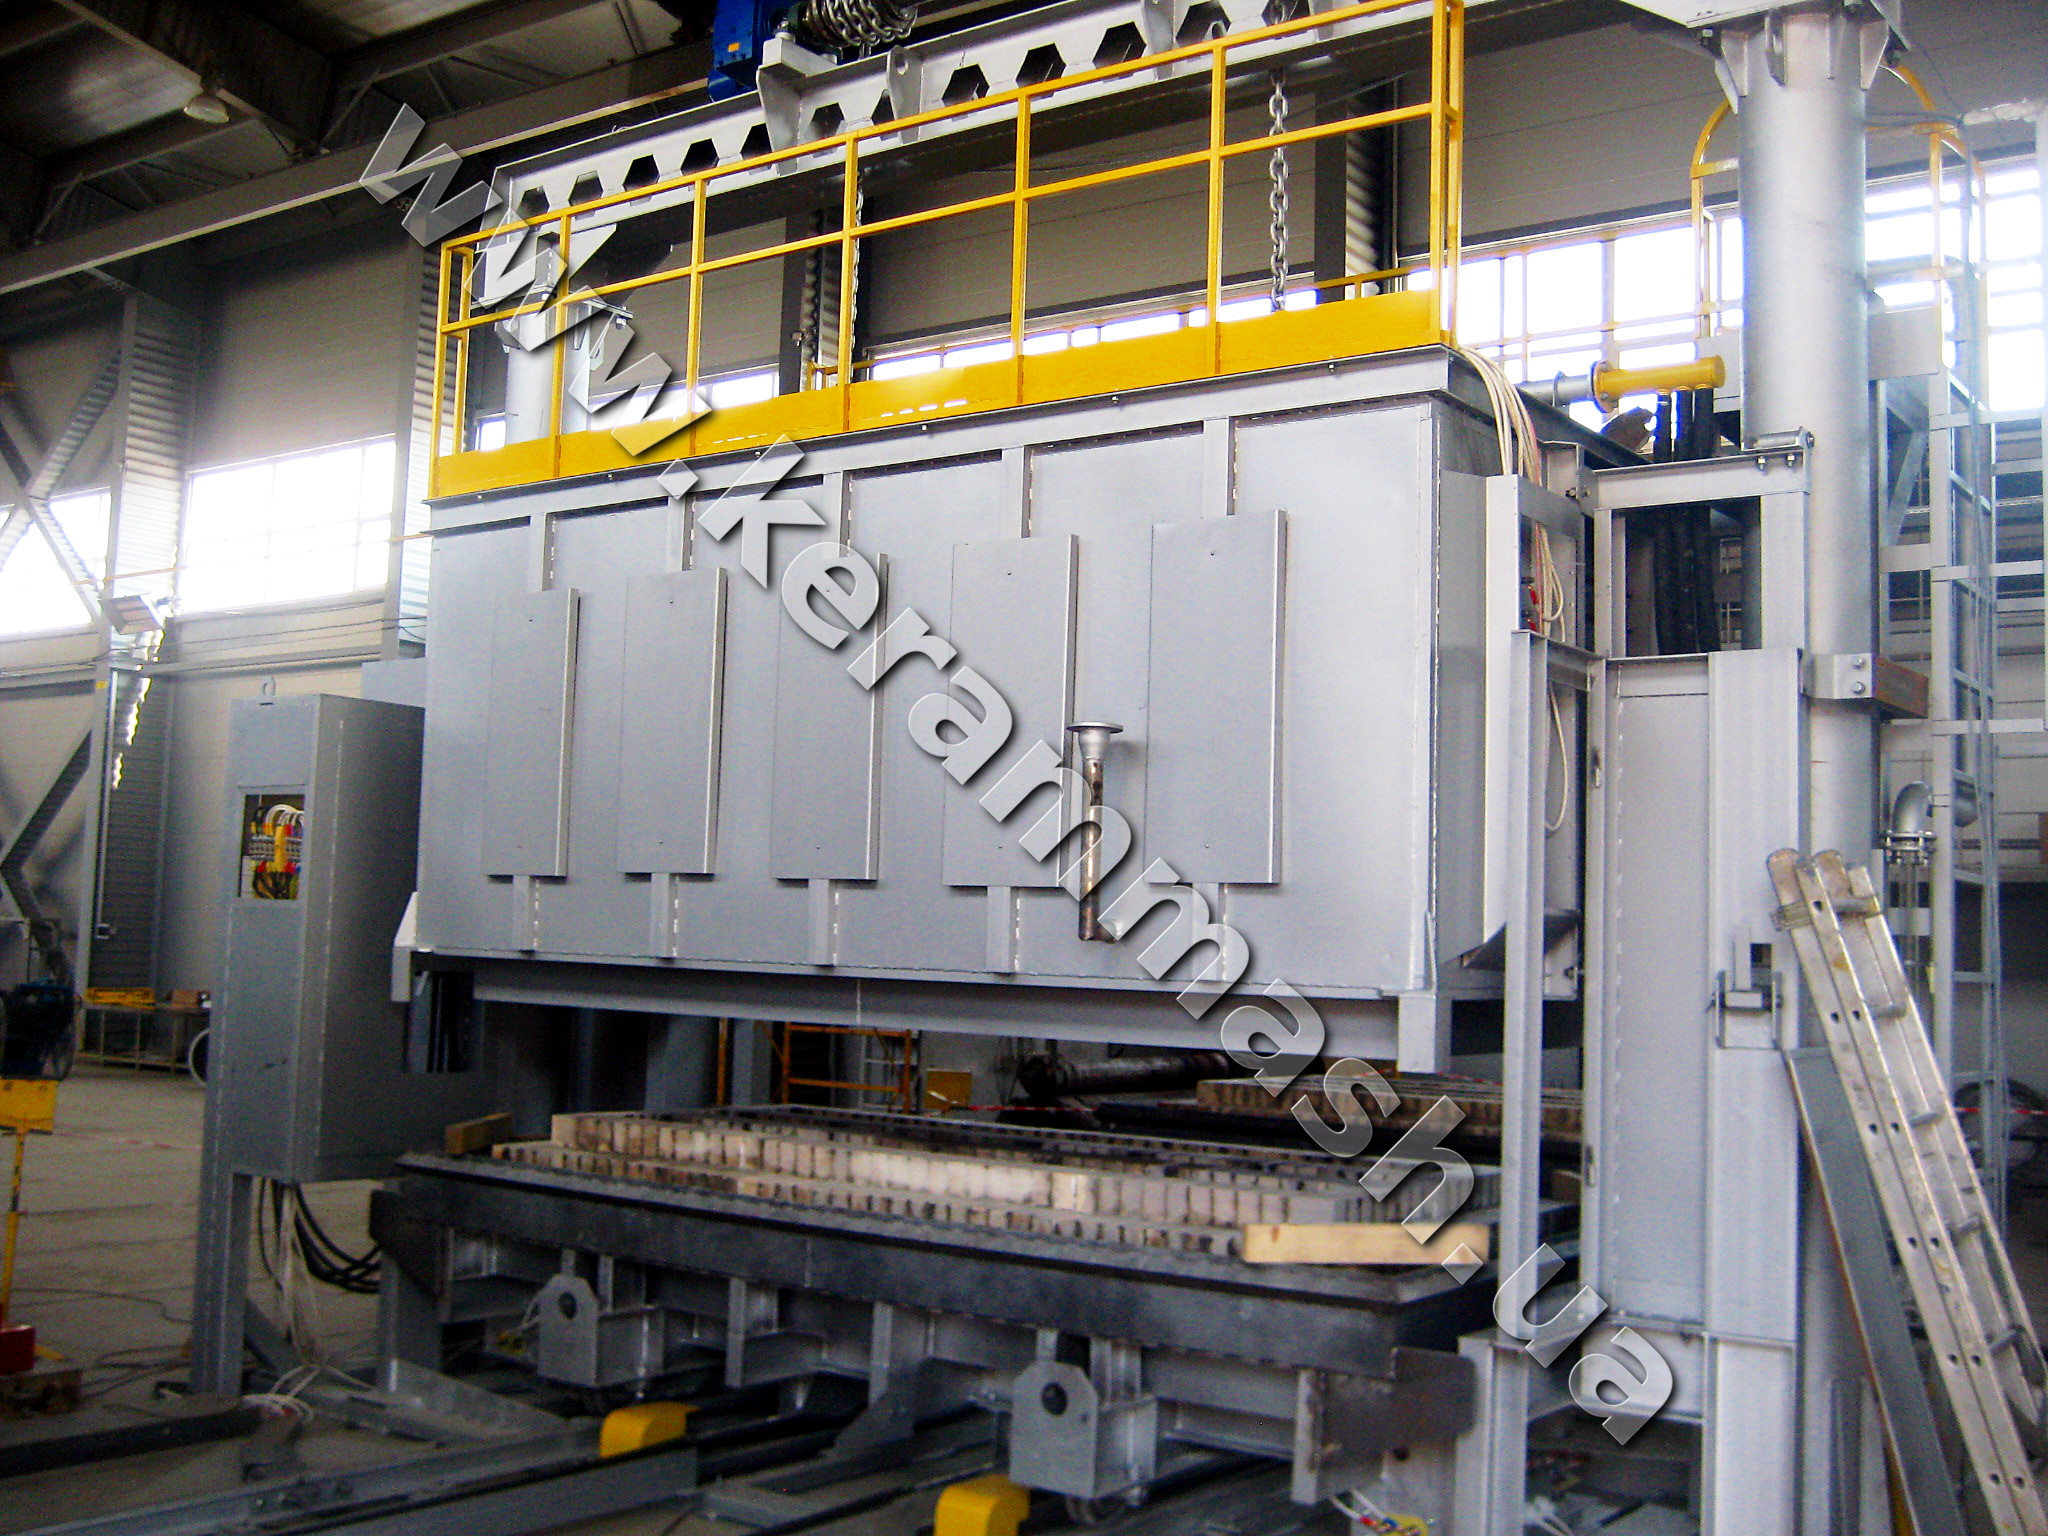 Bell-type industrial furnace for heat treatment